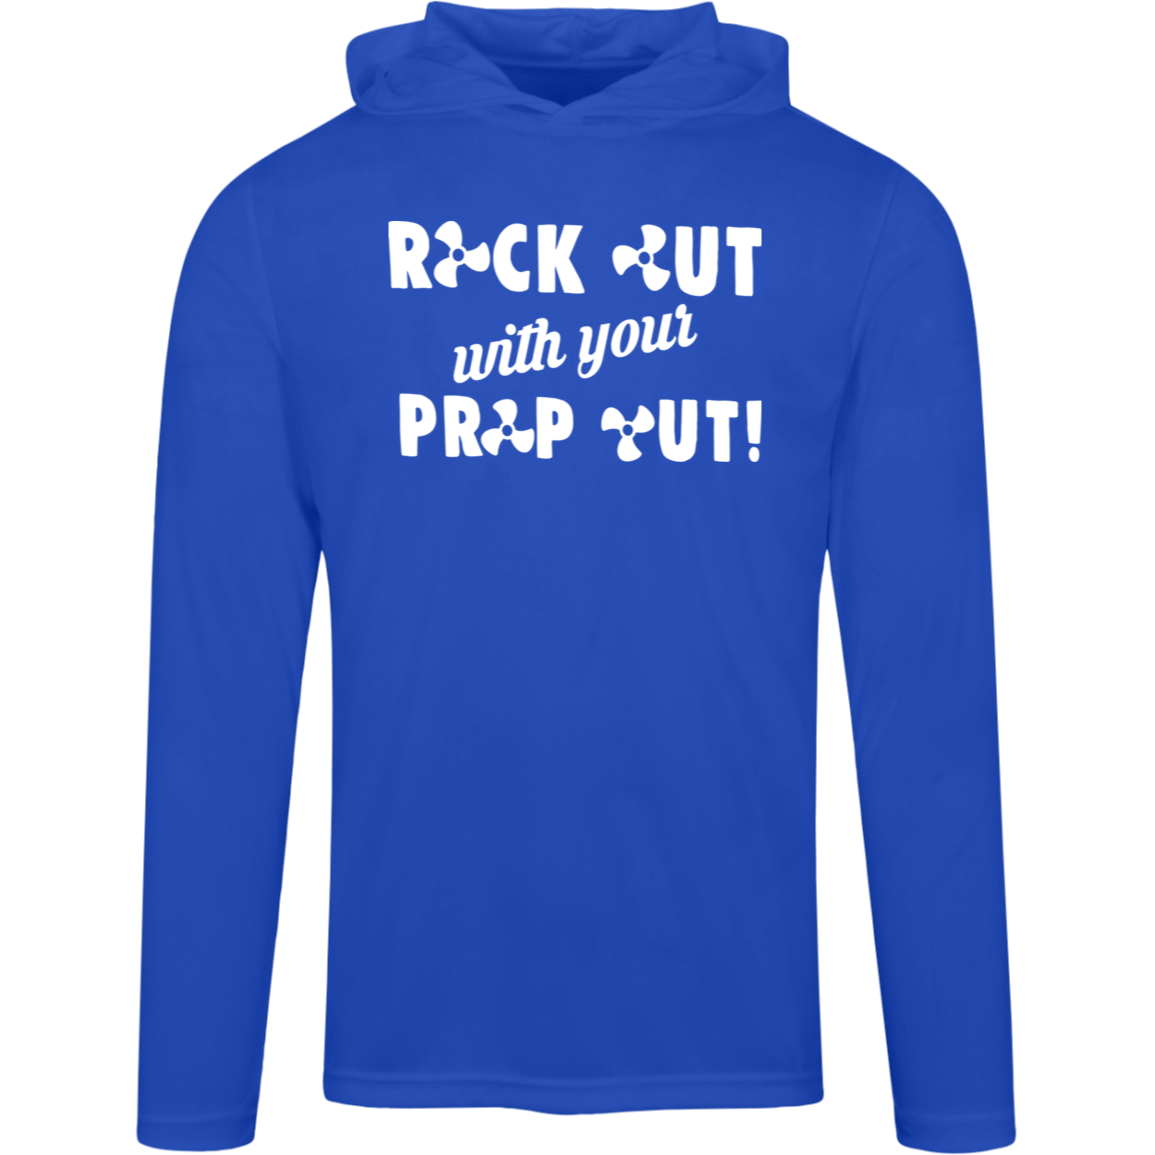 ***2 SIDED***  HRCL FL - Rock Out with your Prop Out - TT41 Team 365 Mens Zone Hooded Tee